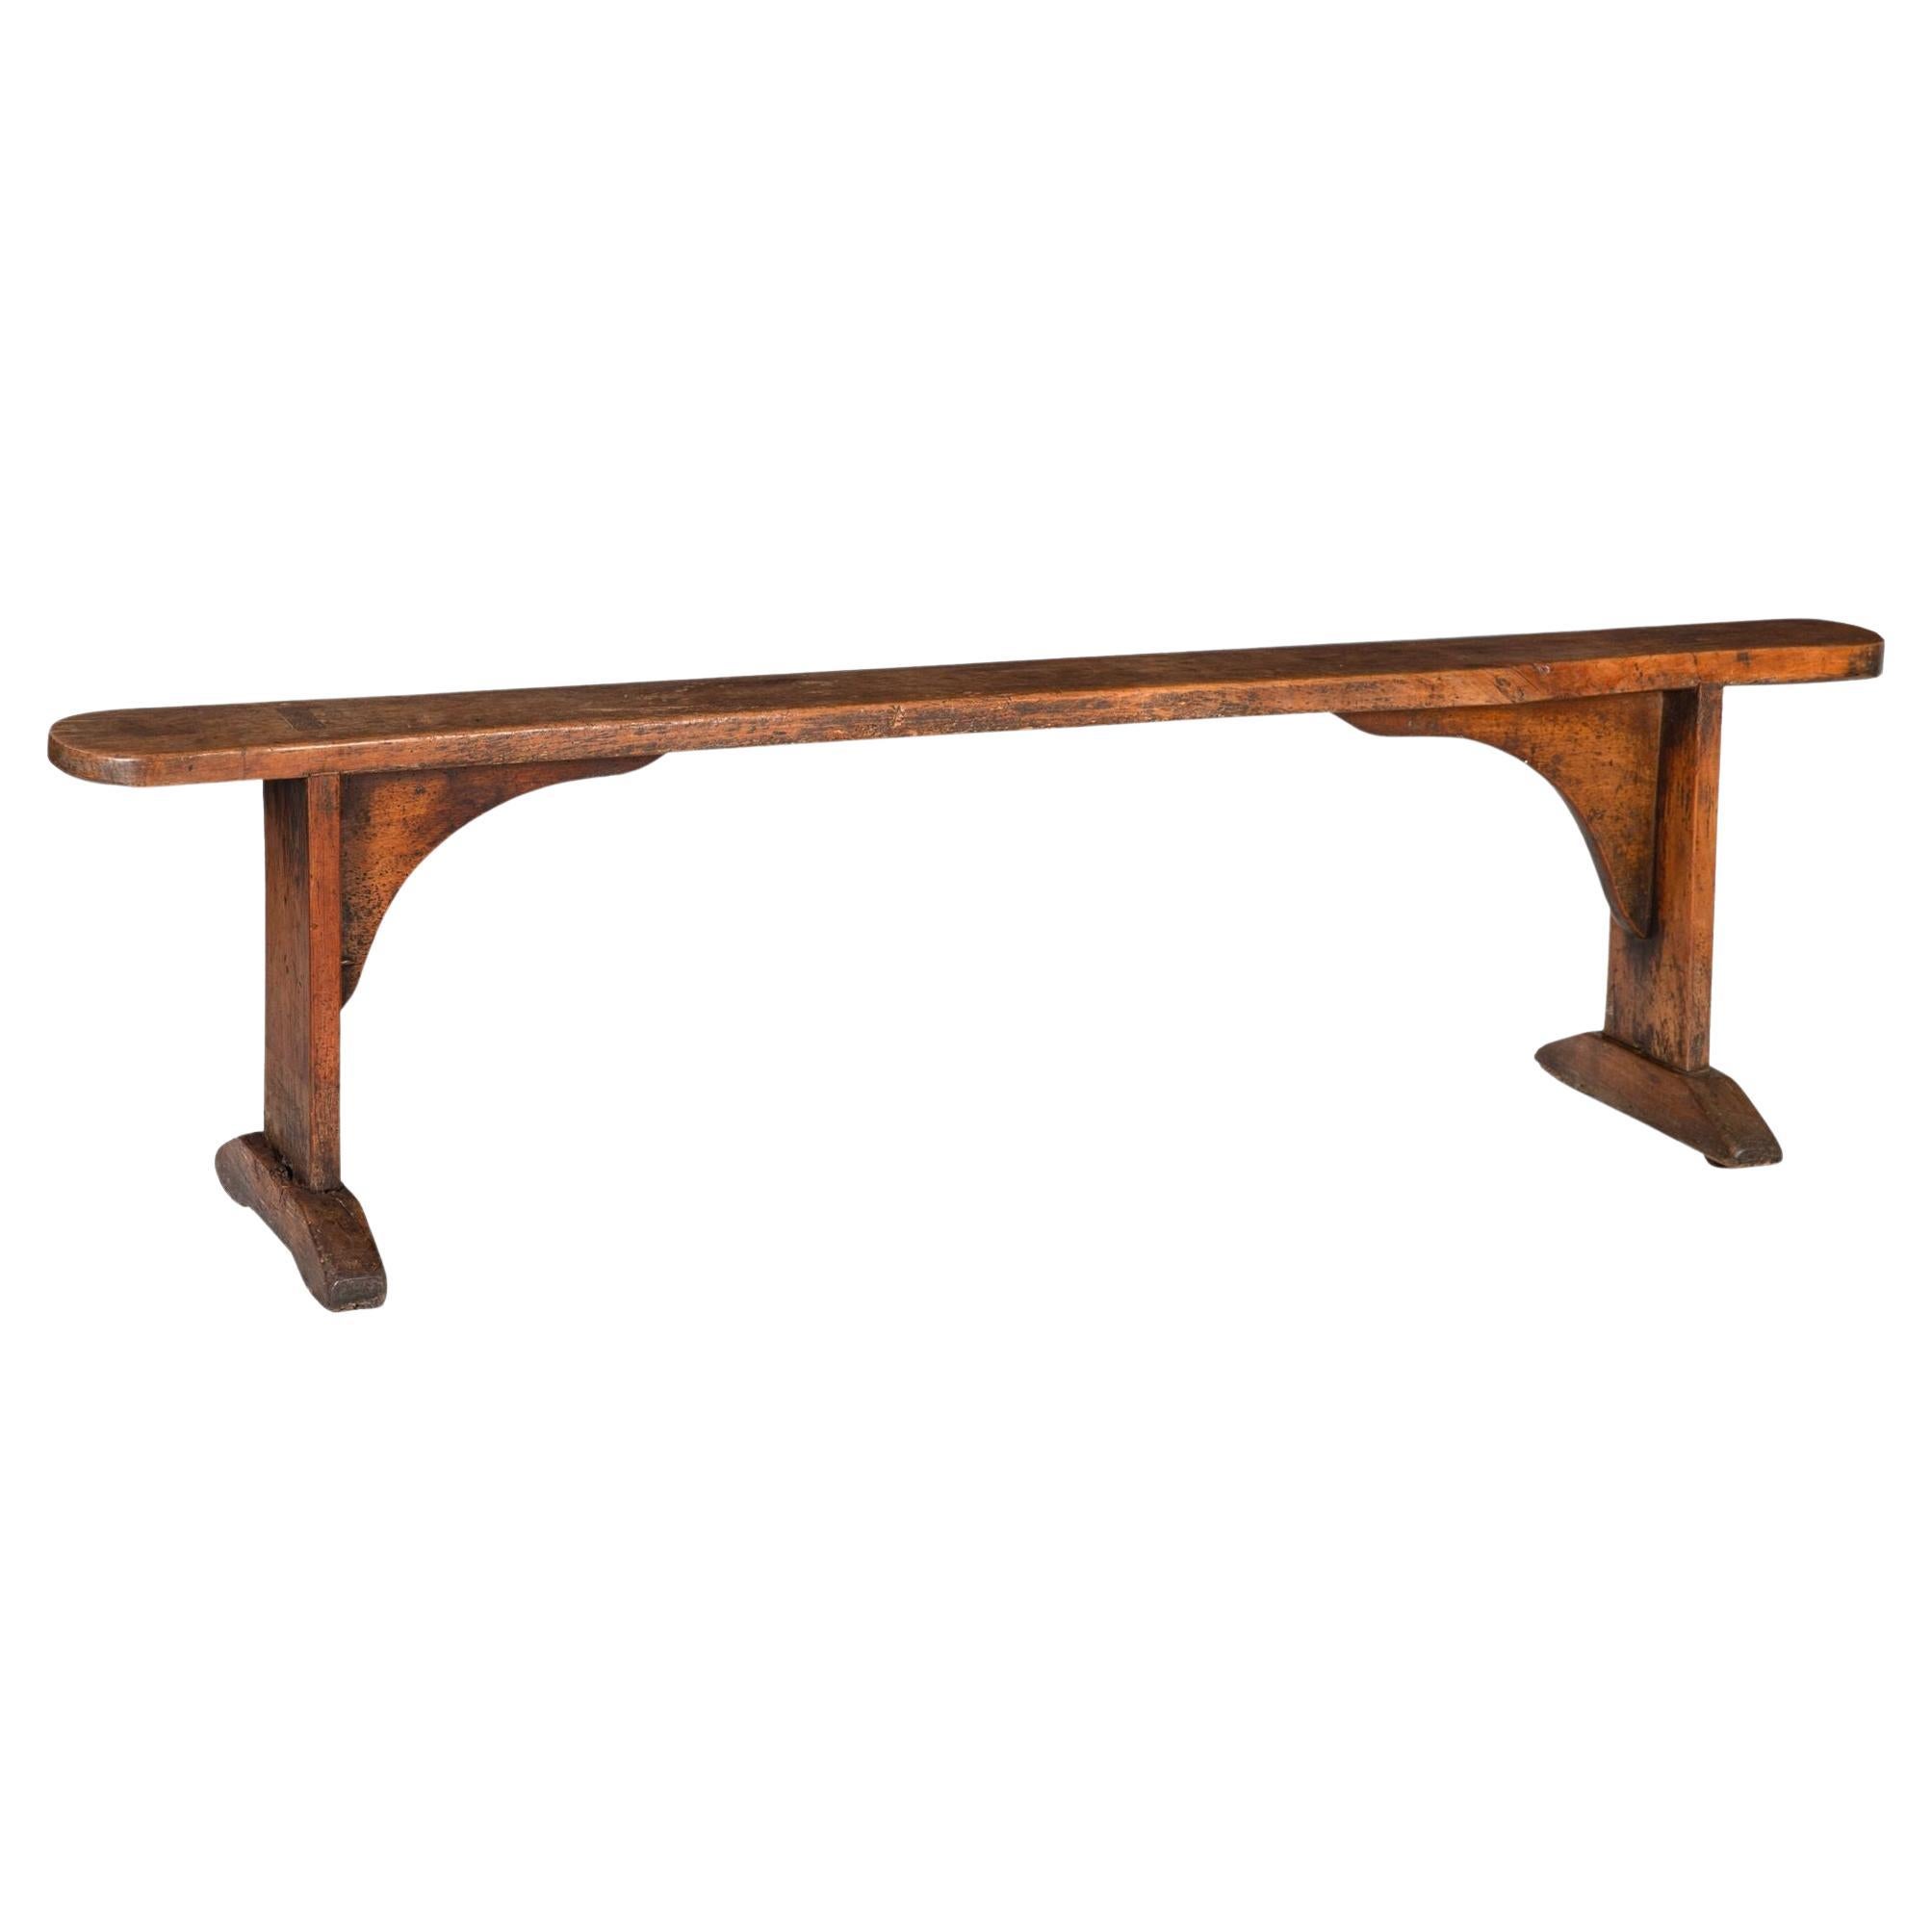 circa 1750 English Georgian Patinated and Worn Elm Trestle Bench For Sale